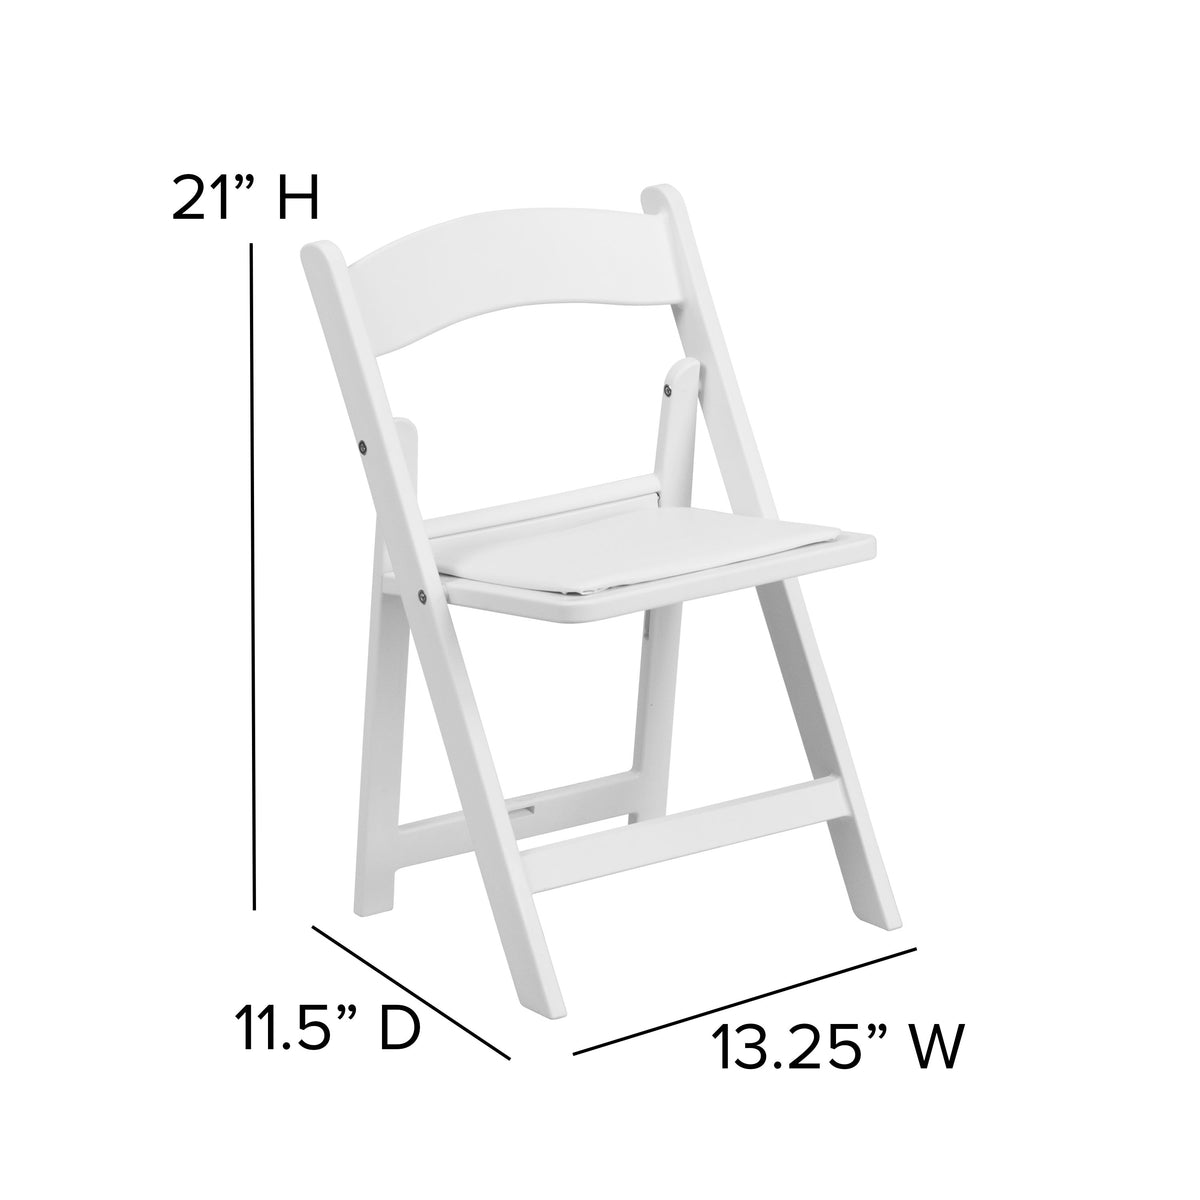 Kids White Resin Folding Chair with White Vinyl Padded Seat